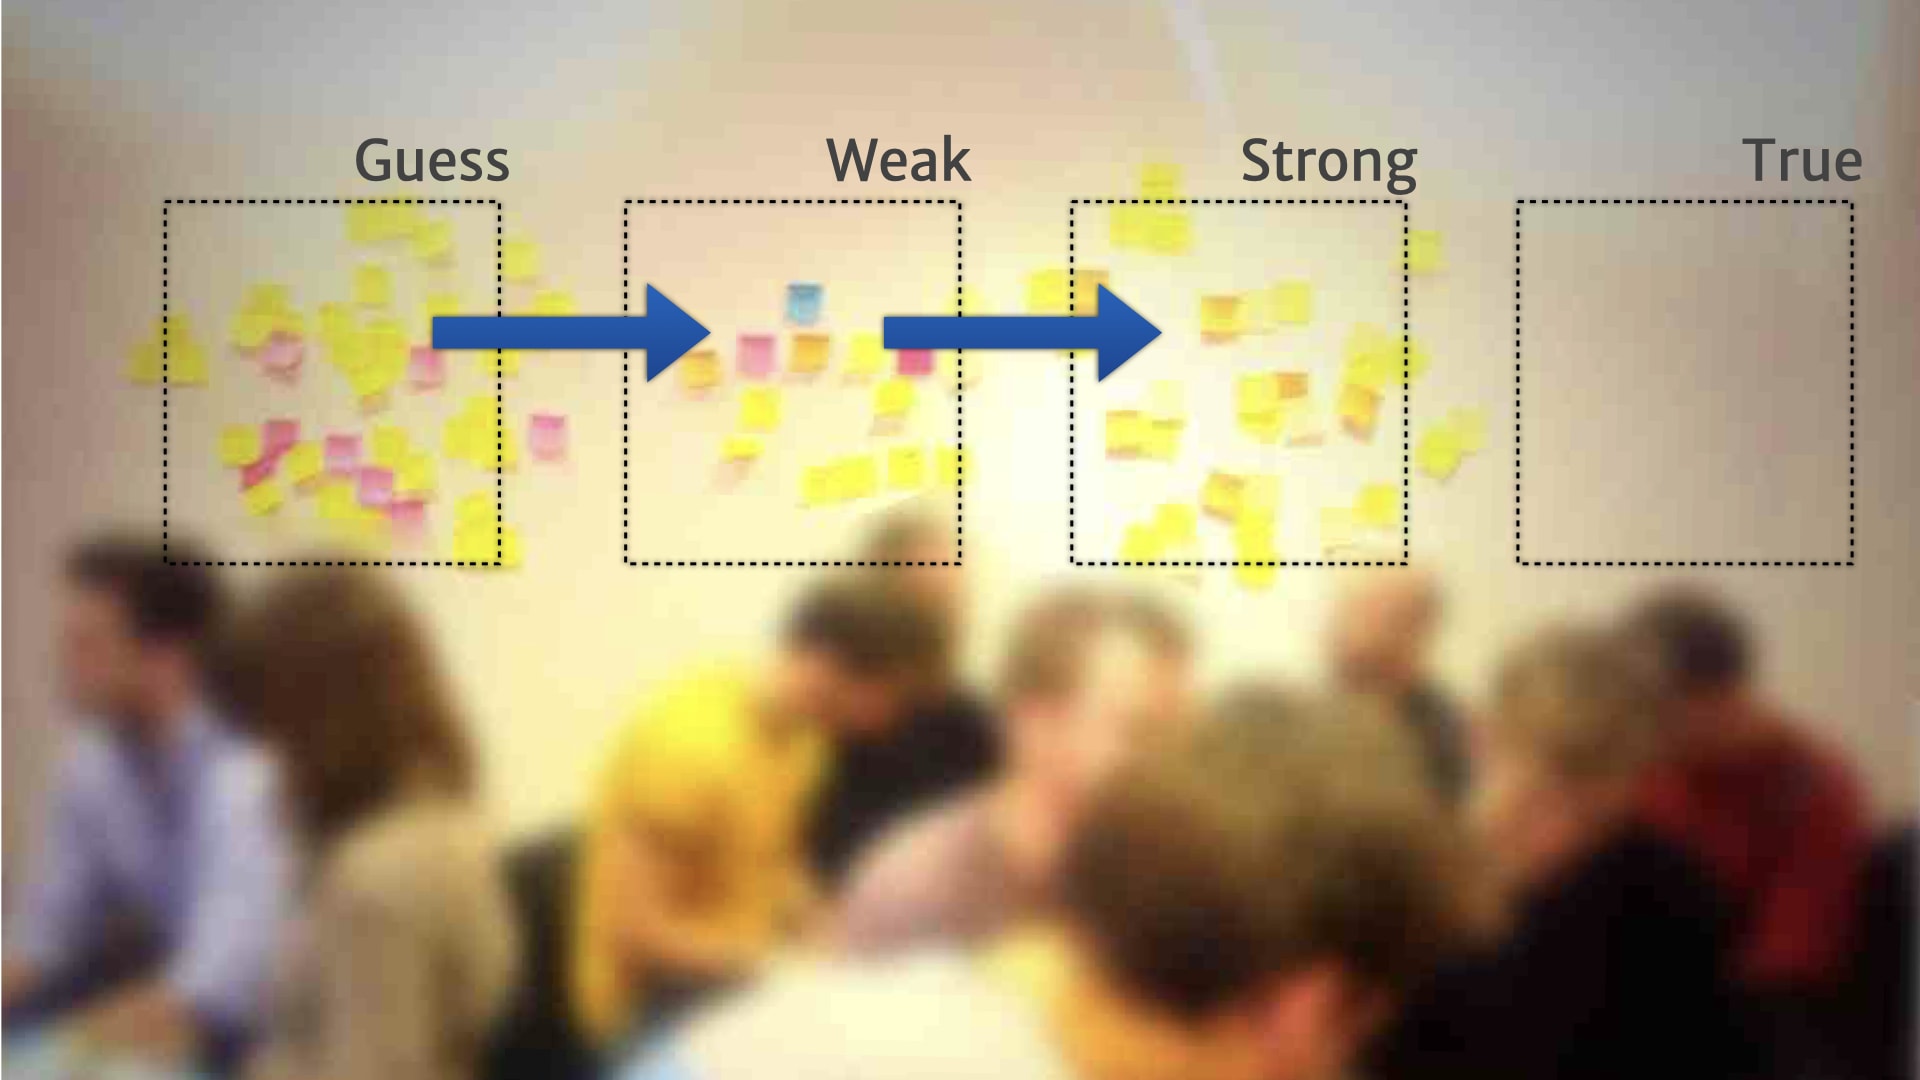 A picture of a wall of post-it notes divided into four categories running left to right (Guess, Weak, Strong, and True). Blue arrows show transitions from Guess to Weak, and from Weak to Strong.